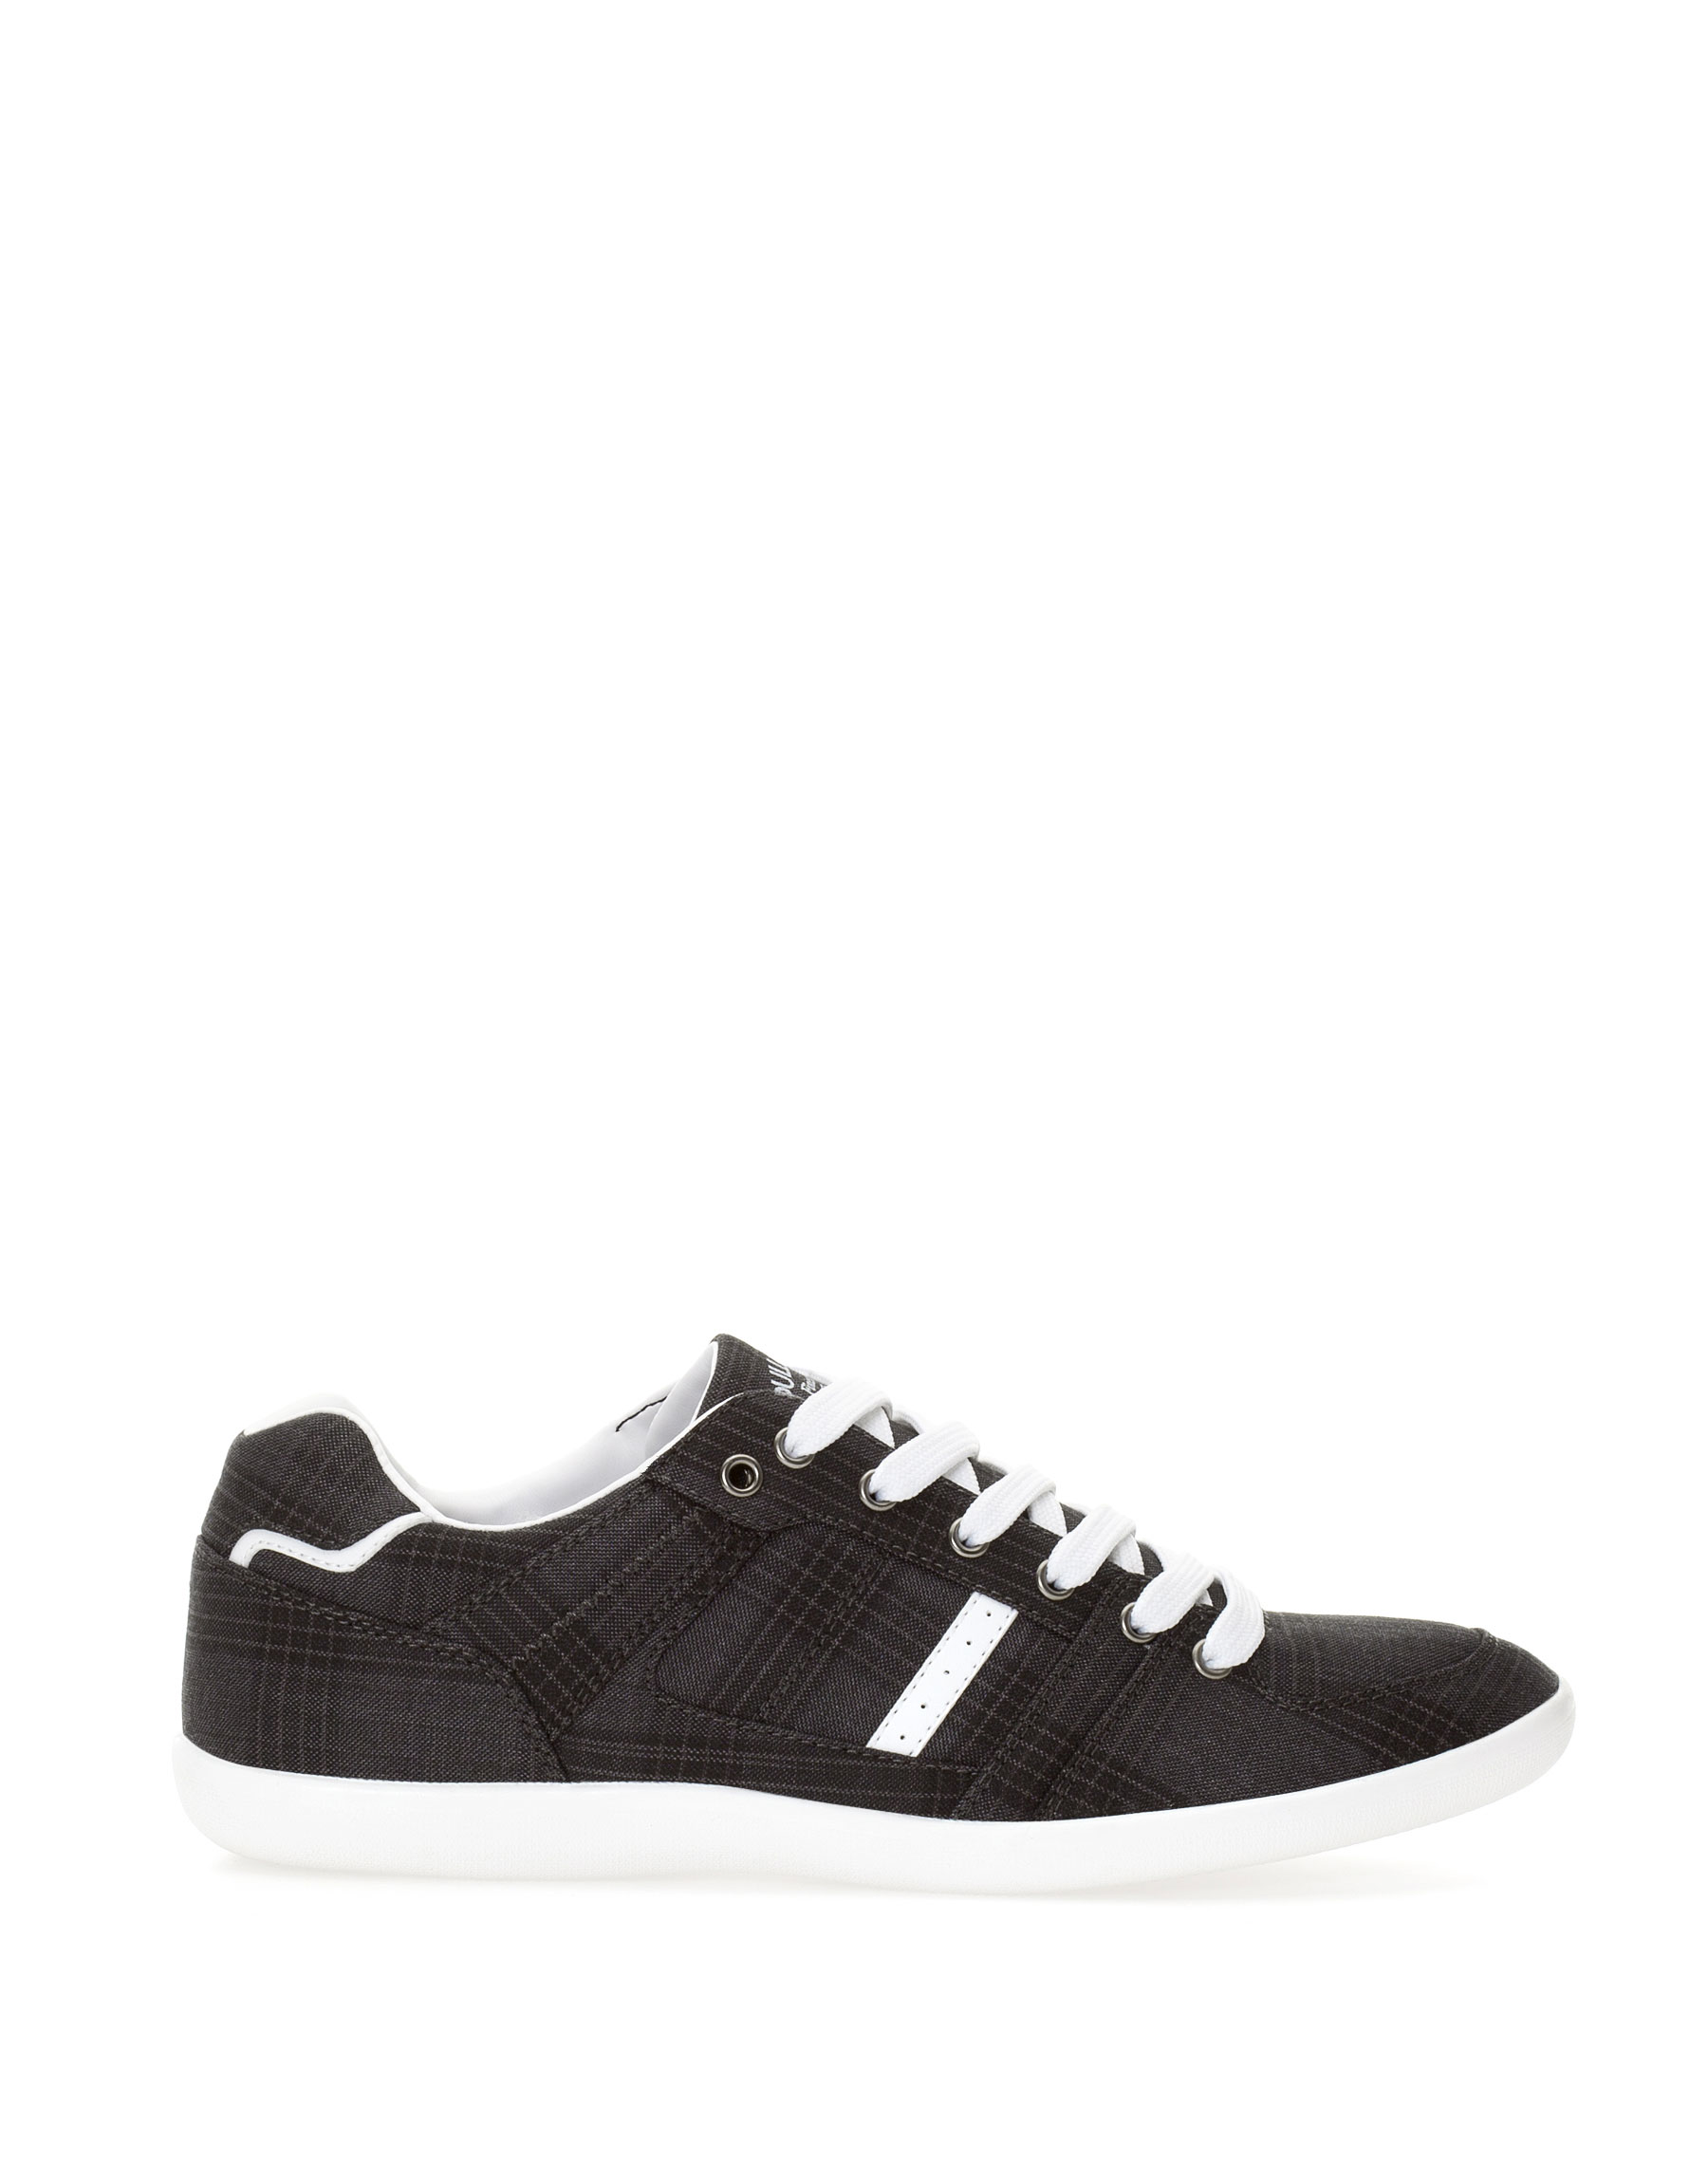 Pull&bear Canvas Semisport Shoes in Black for Men (CHARCOAL) | Lyst